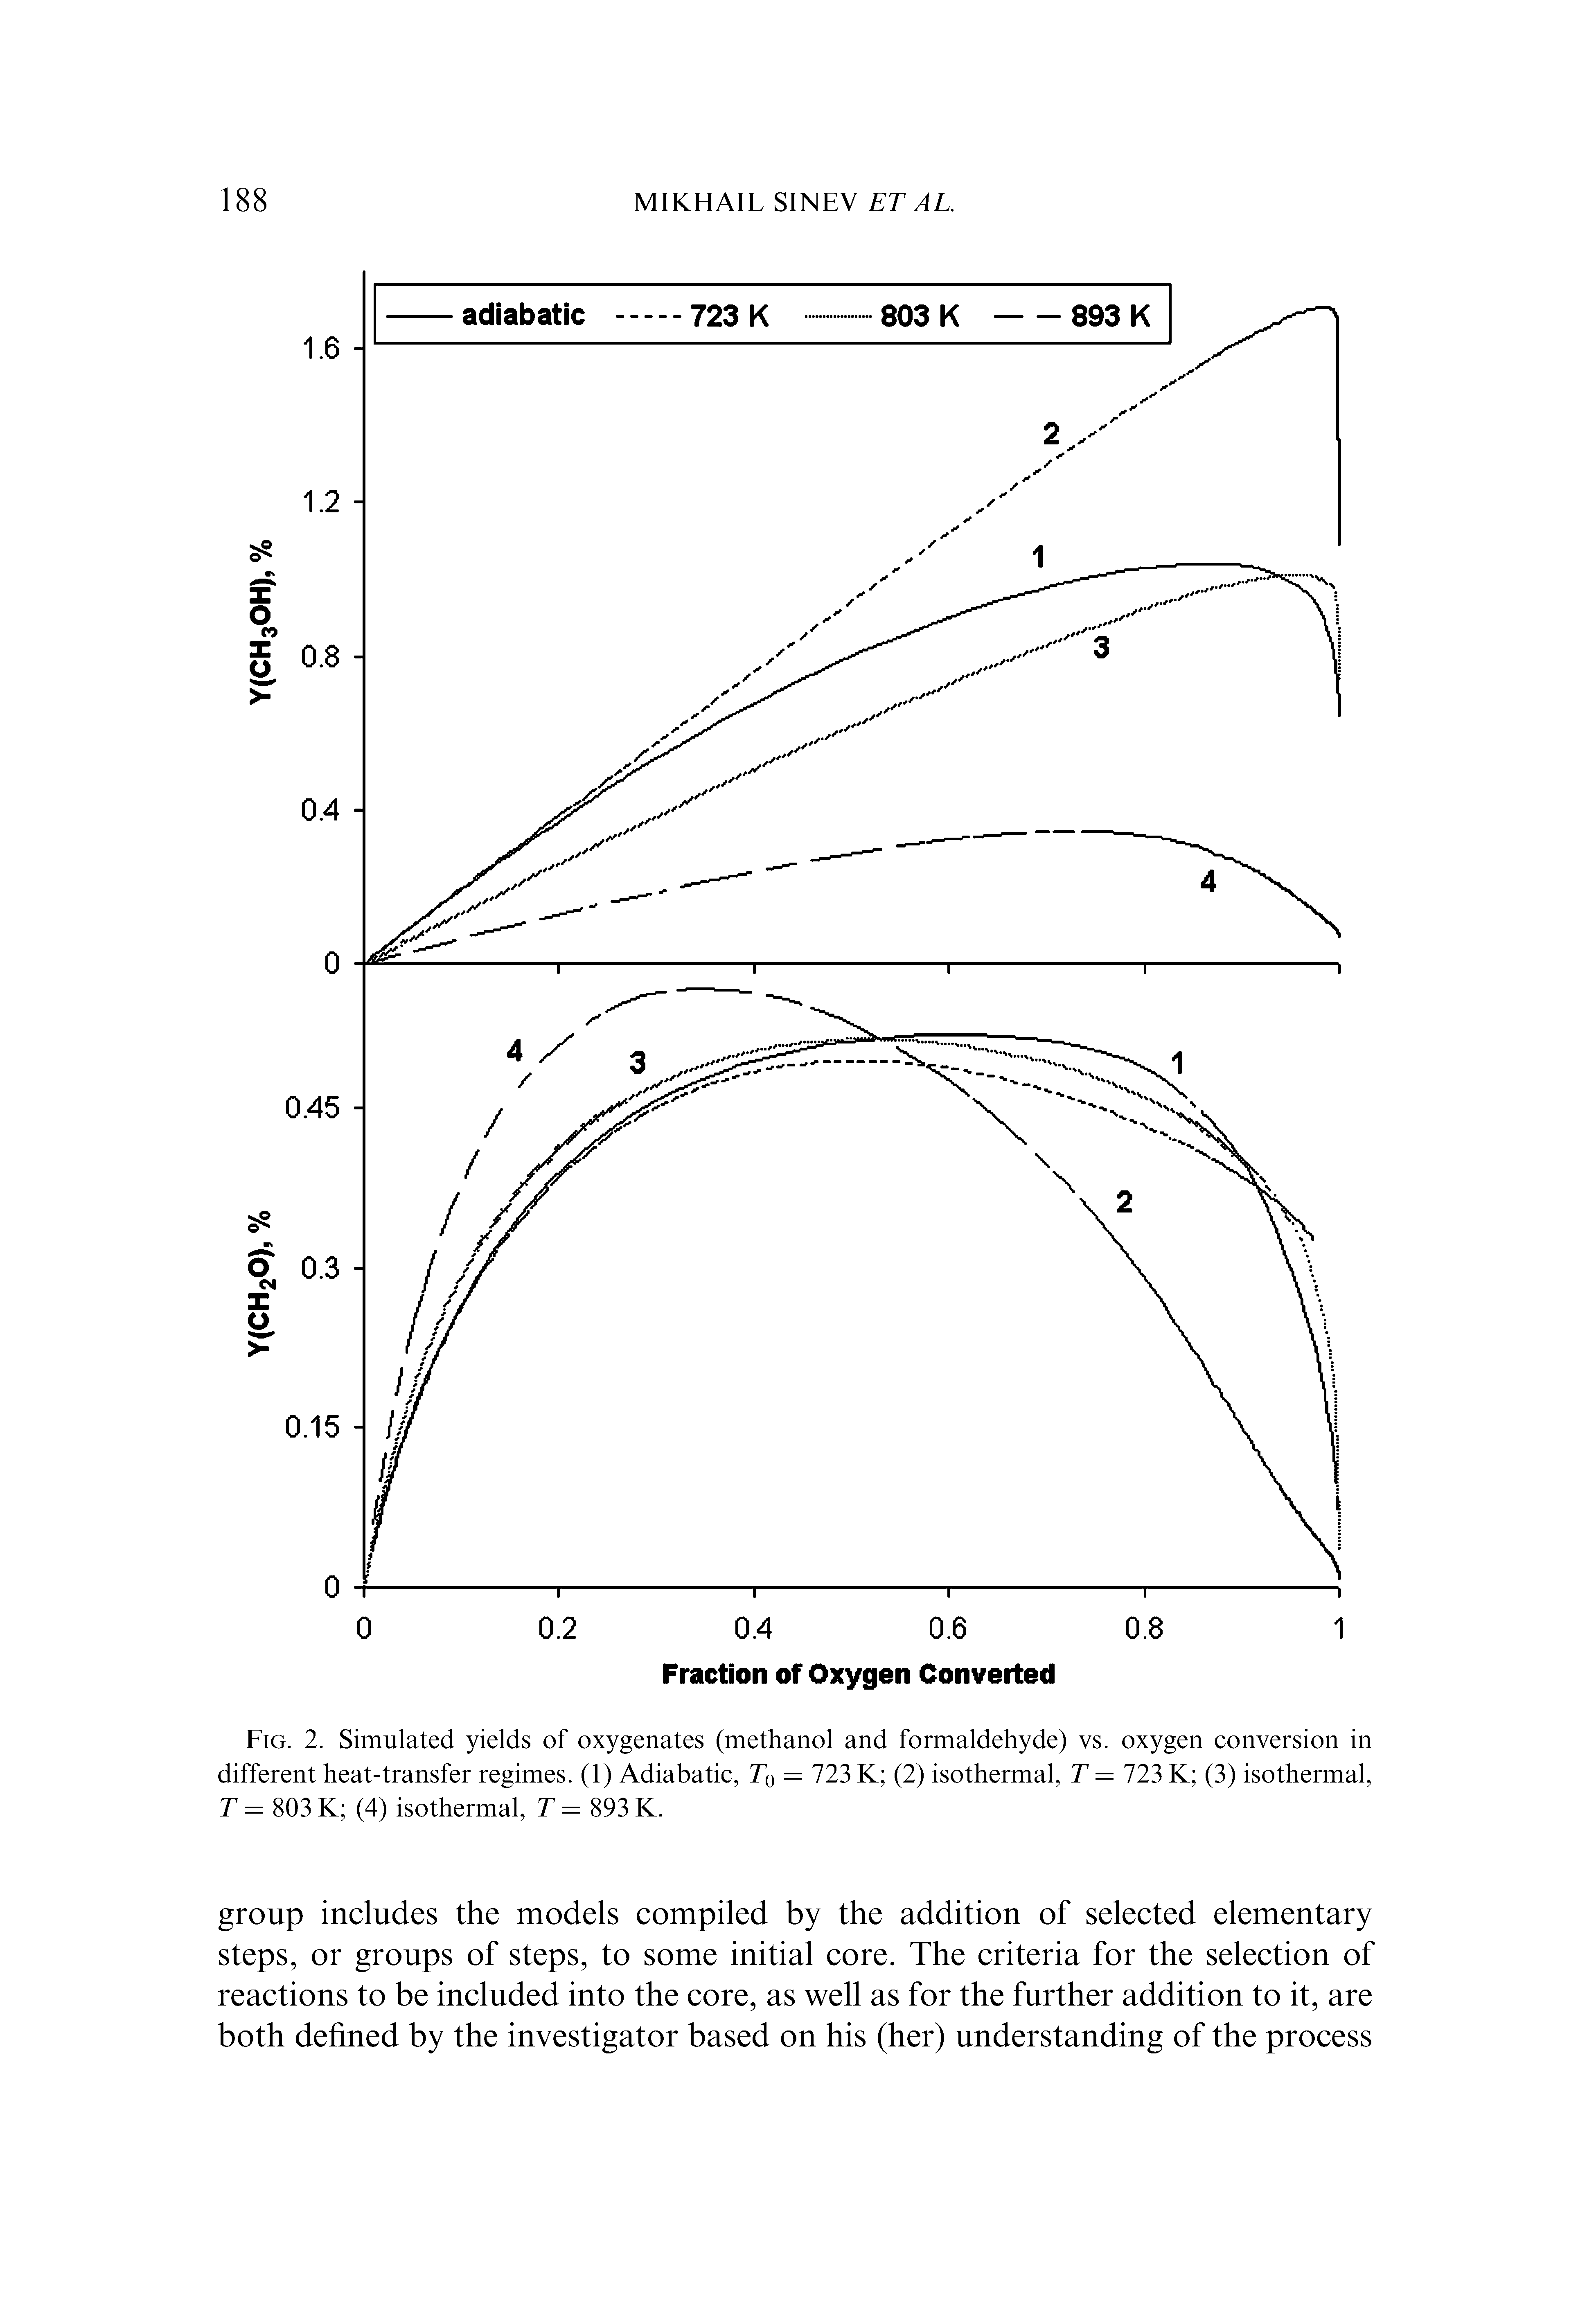 Fig. 2. Simulated yields of oxygenates (methanol and formaldehyde) vs. oxygen conversion in different heat-transfer regimes. (1) Adiabatic, T0 = 723 K (2) isothermal, T = 723 K (3) isothermal, T = 803 K (4) isothermal, T = 893 K.